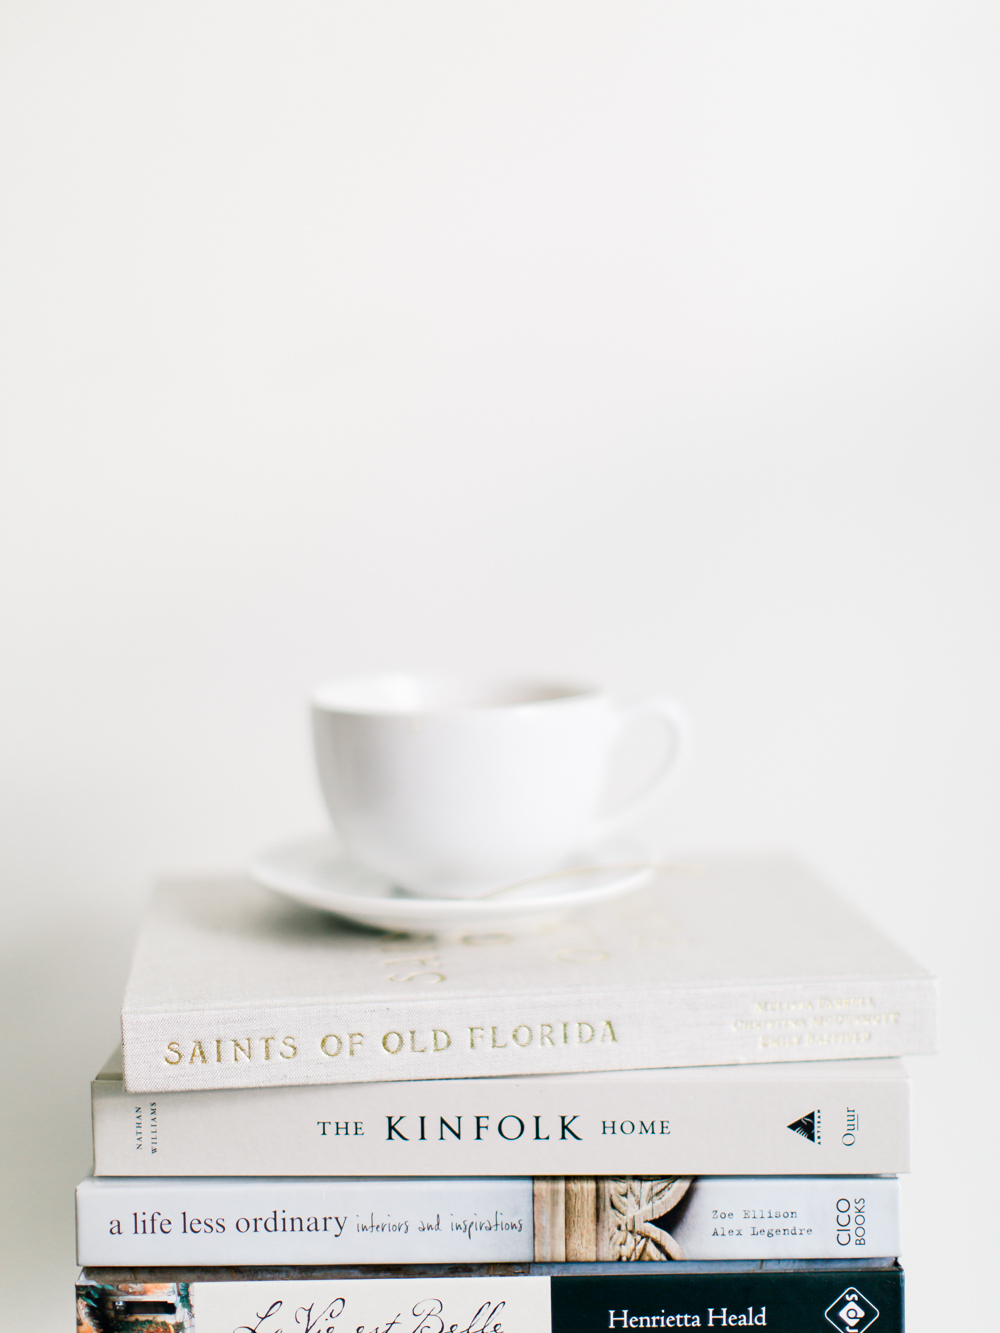 My Fave Coffee Table Books